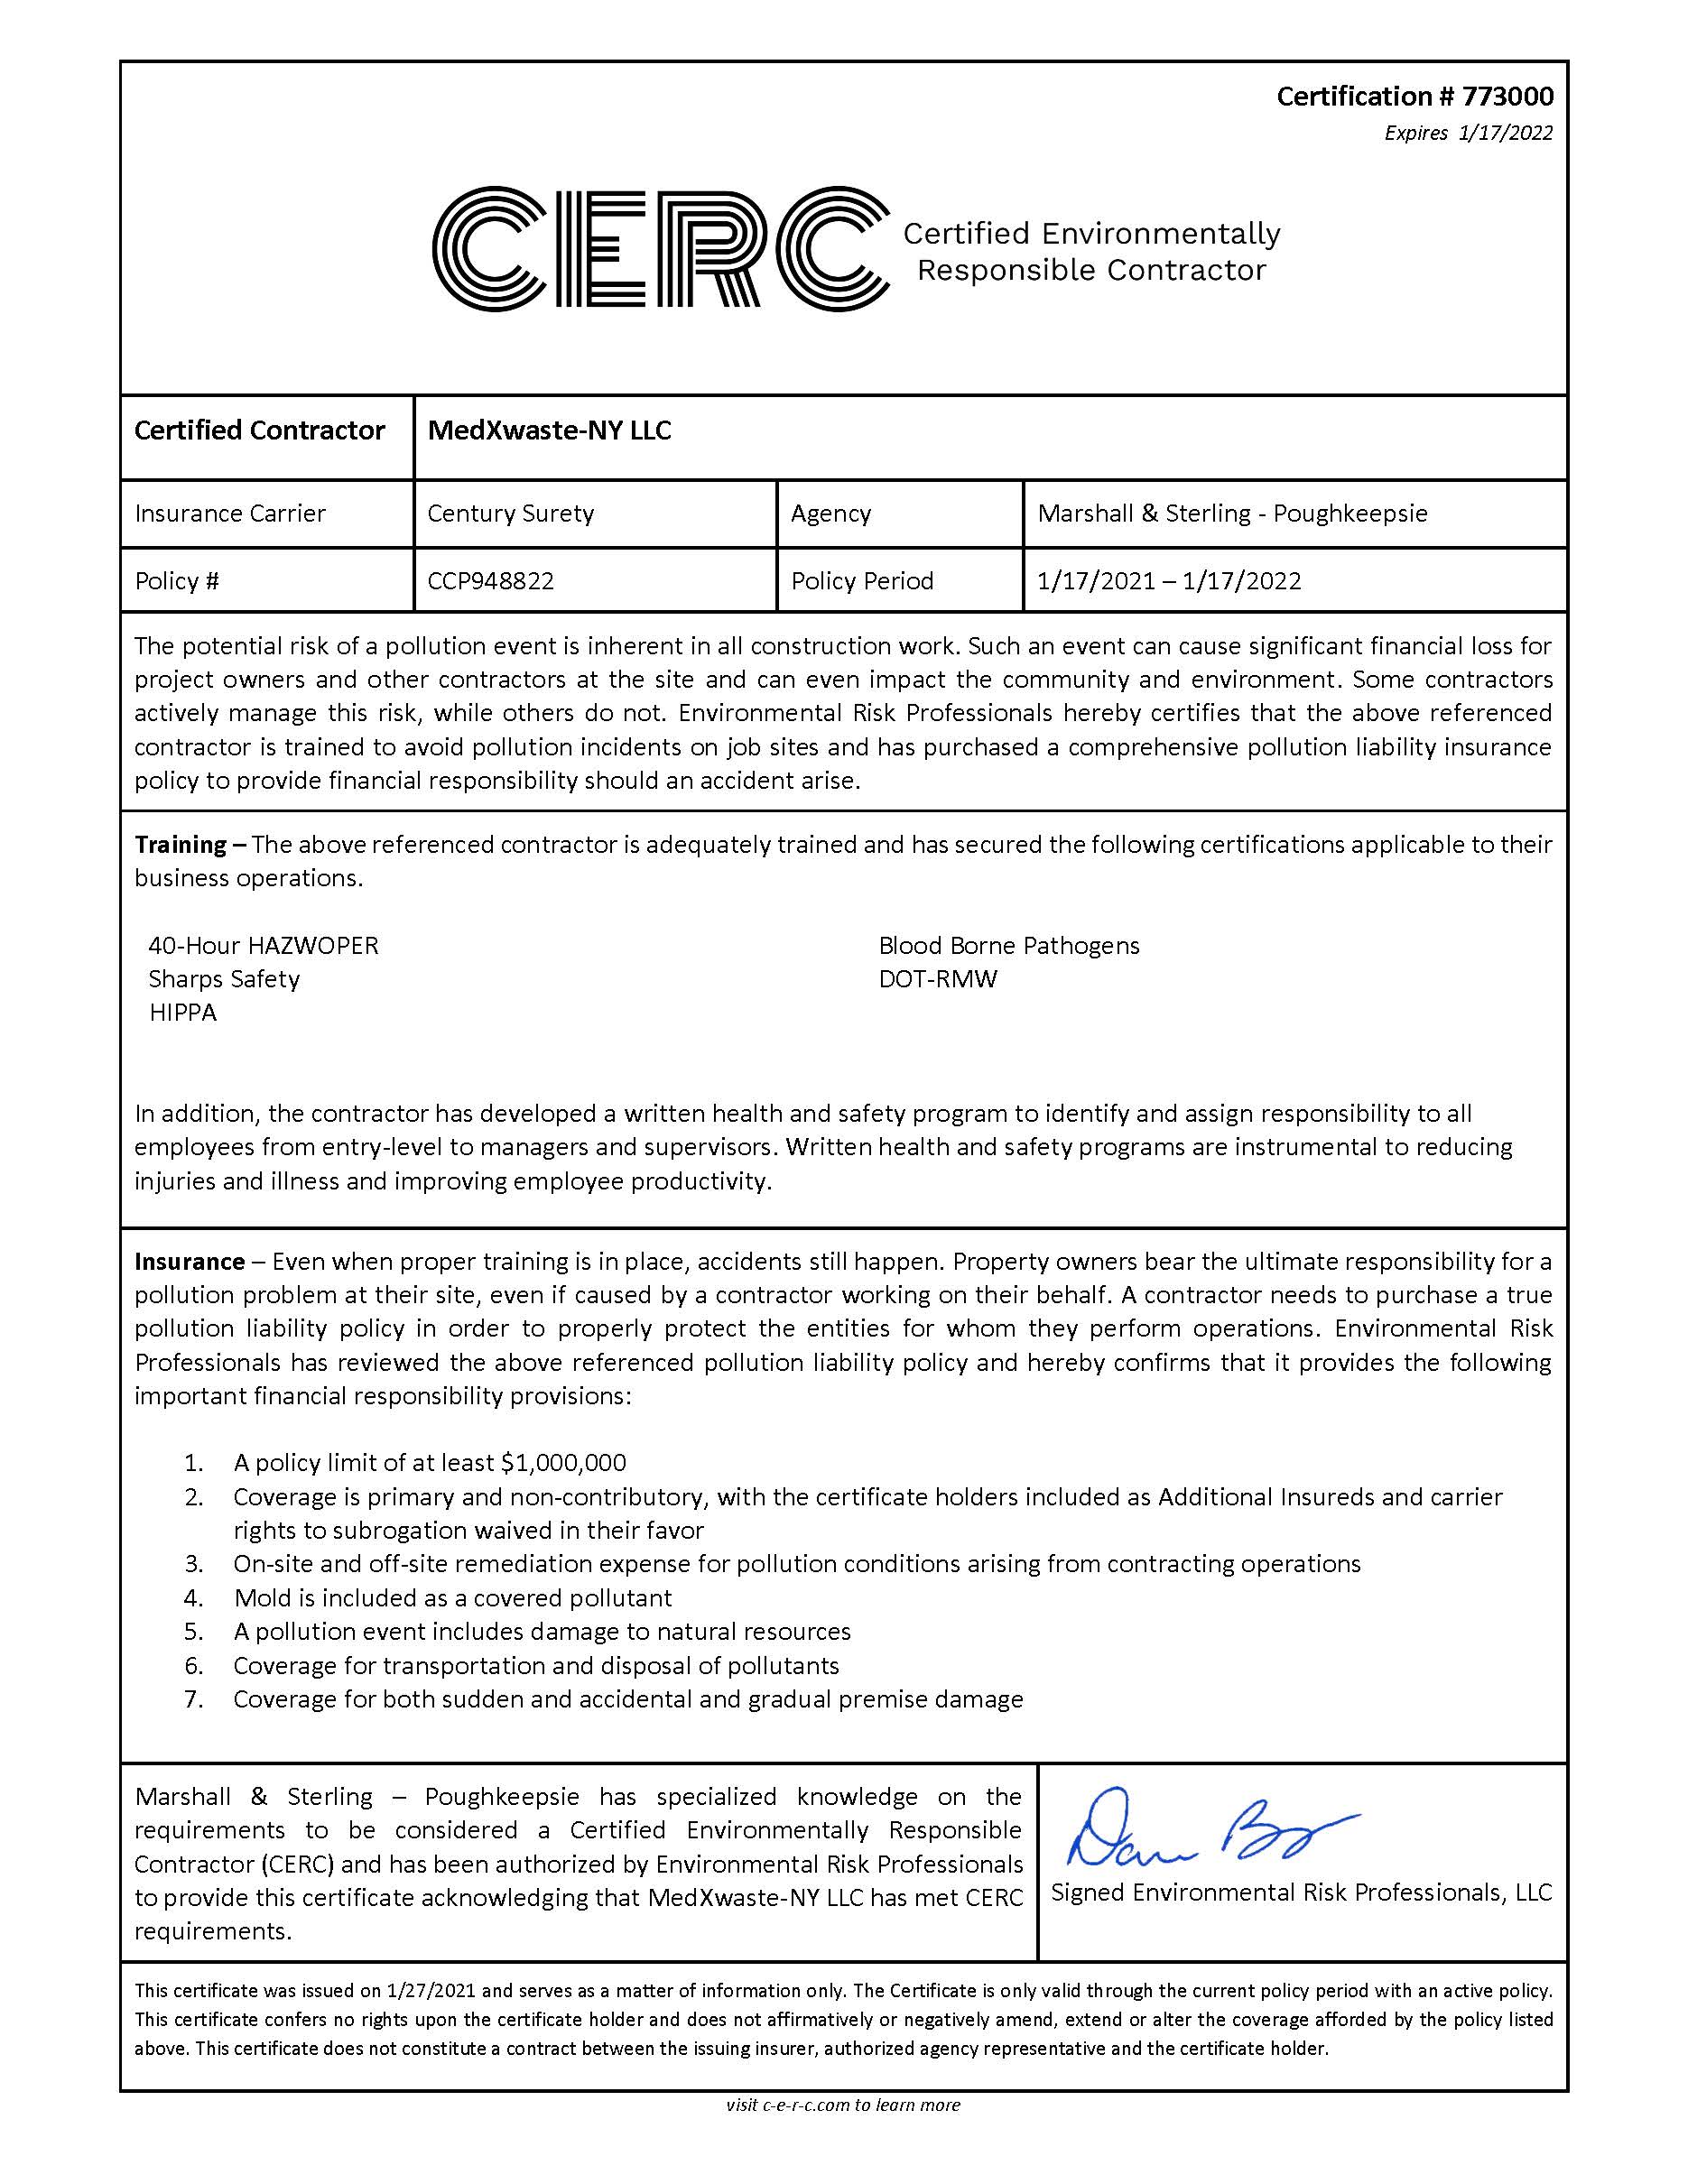 Certified Environmentally Responsible Medical Waste Contractor